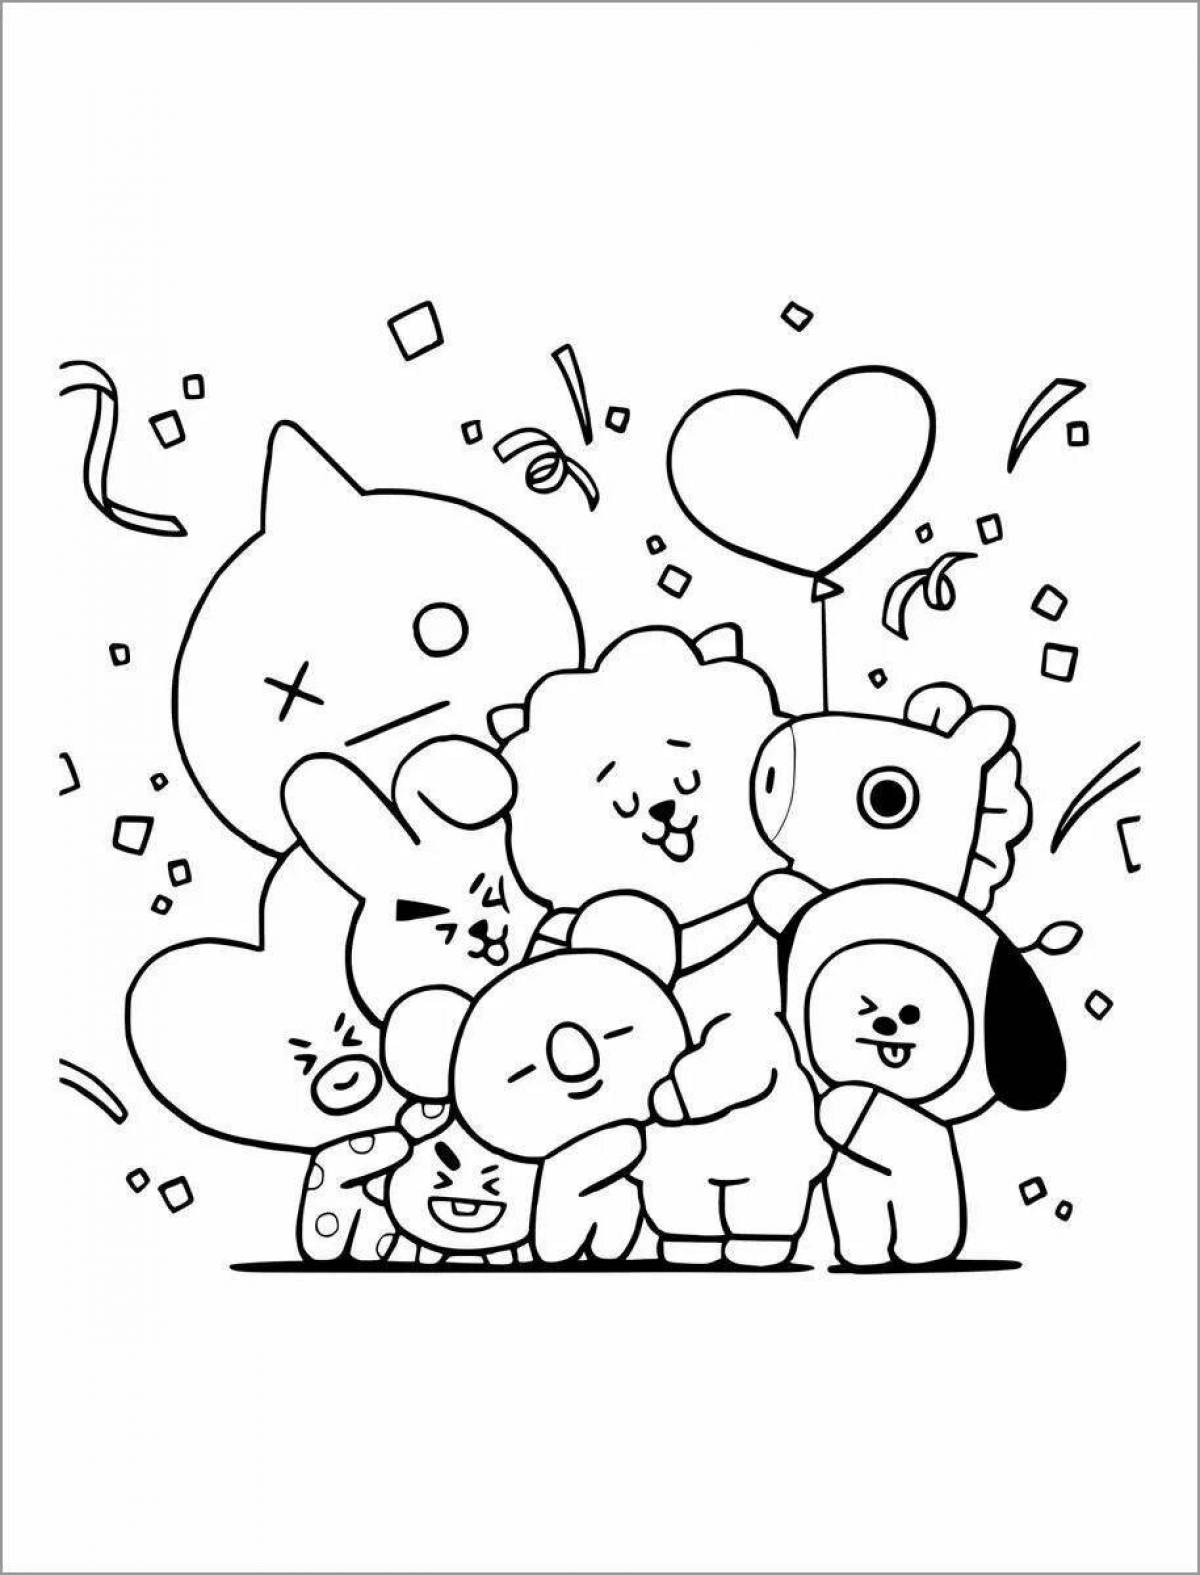 Amazing toys bts coloring book